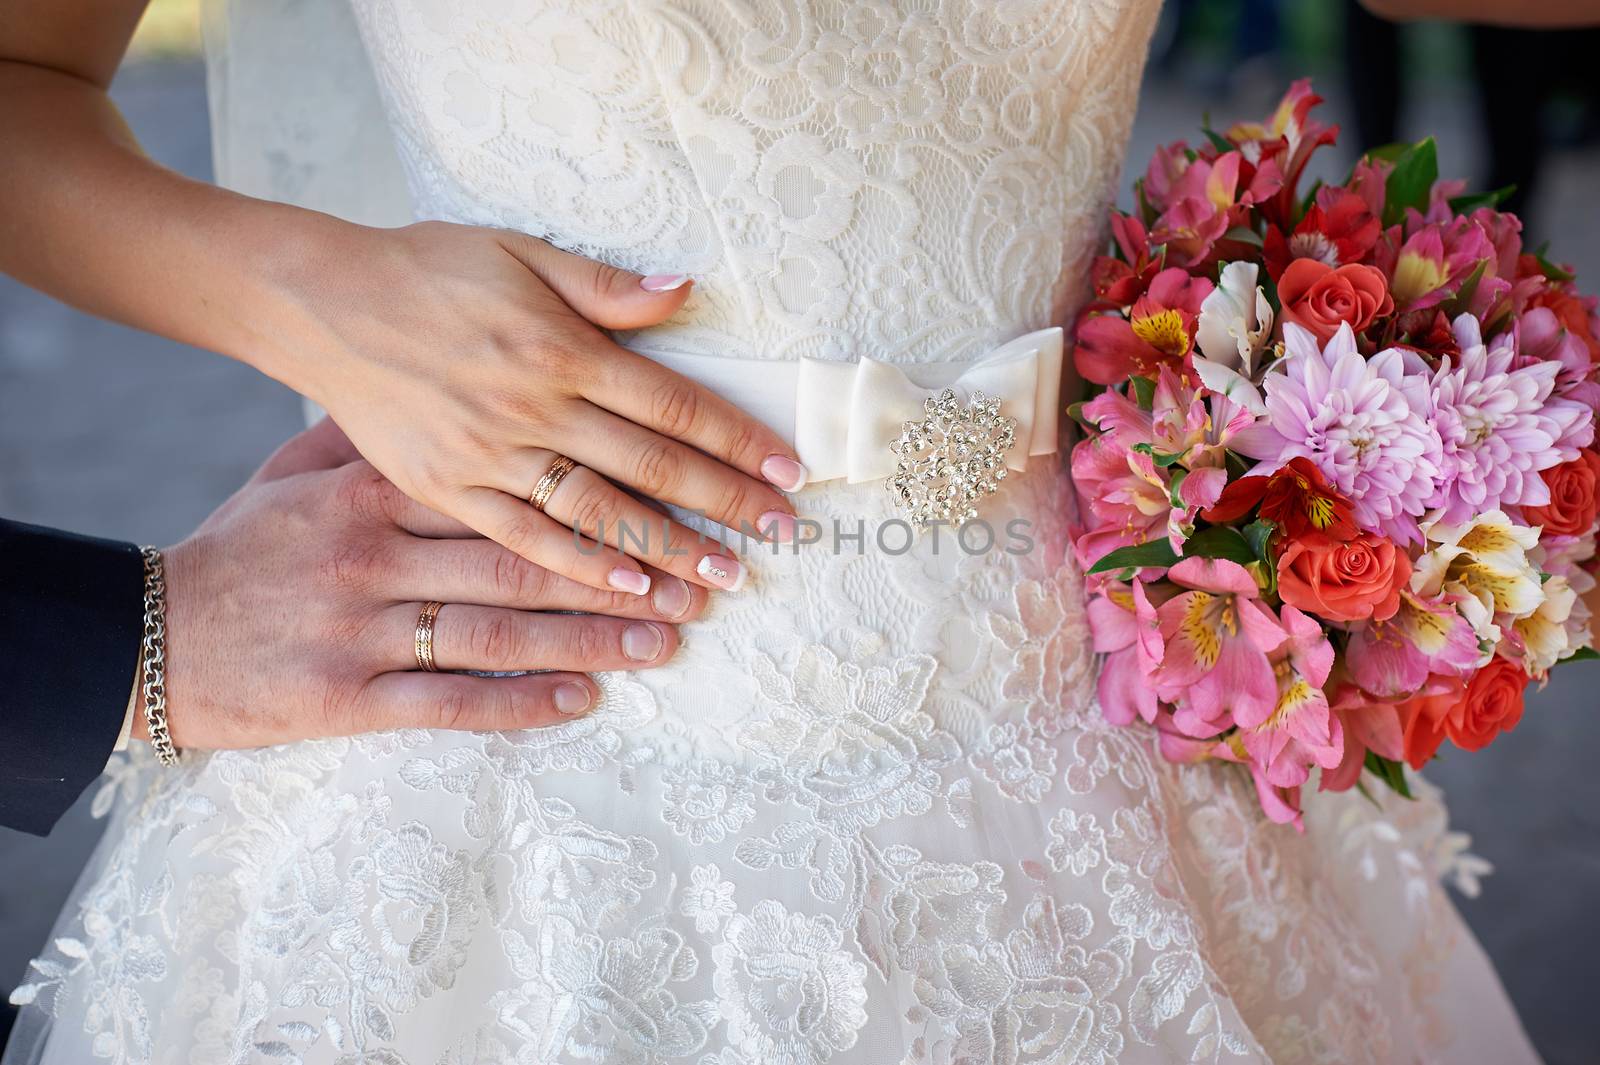 hands of bride and groom with rings wedding bouquet by timonko